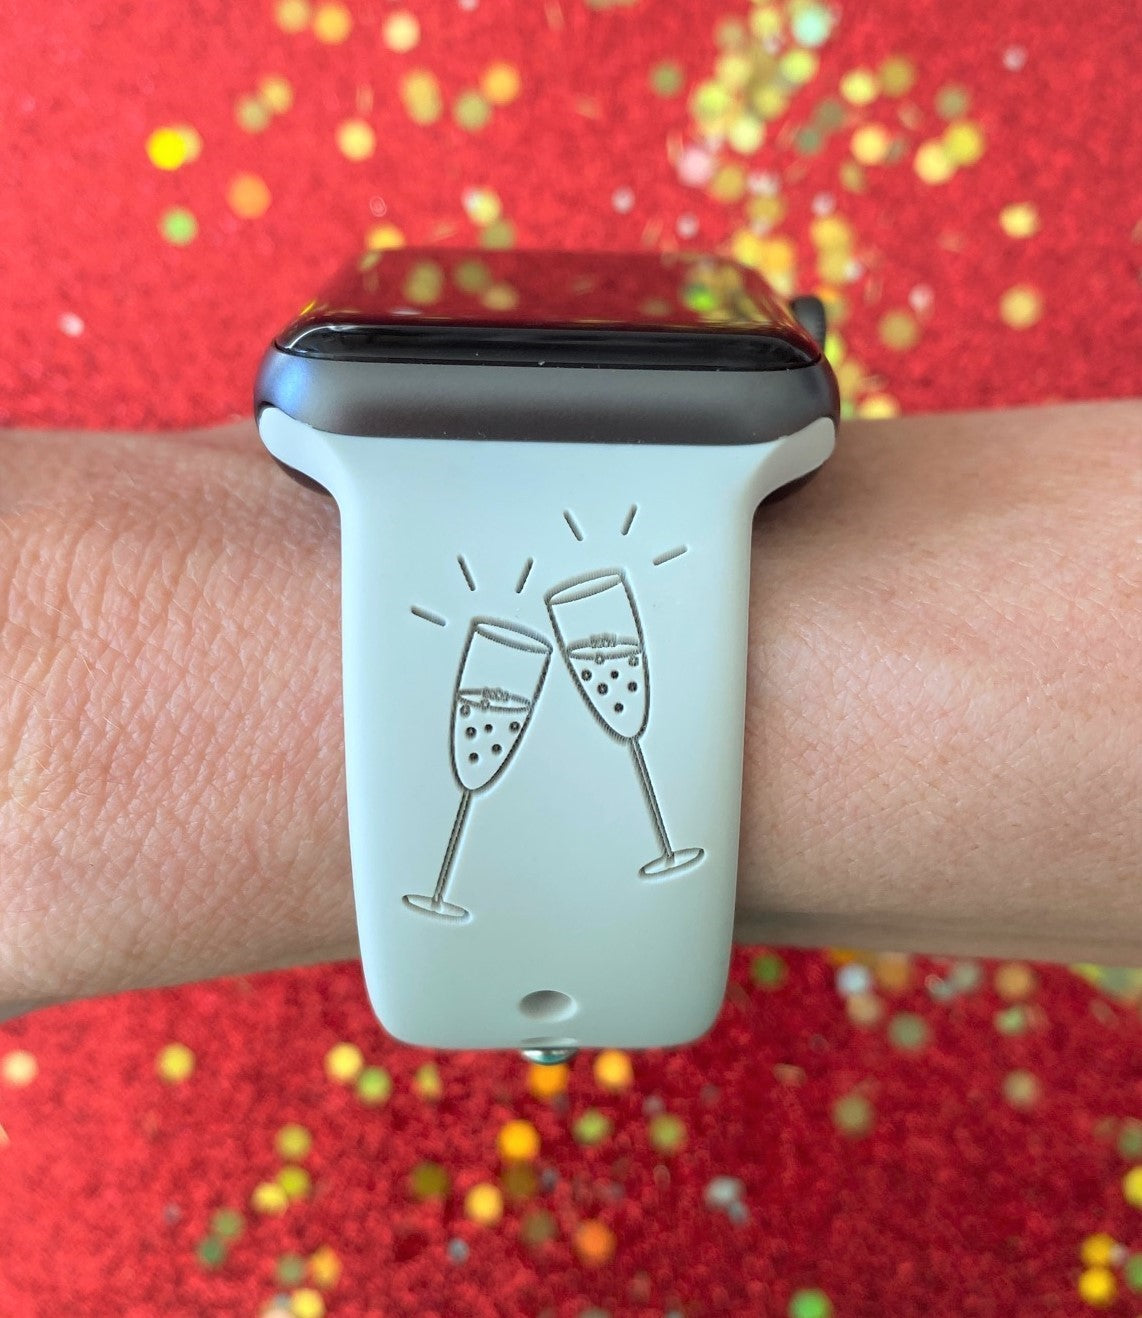 New Years Apple Watch Band